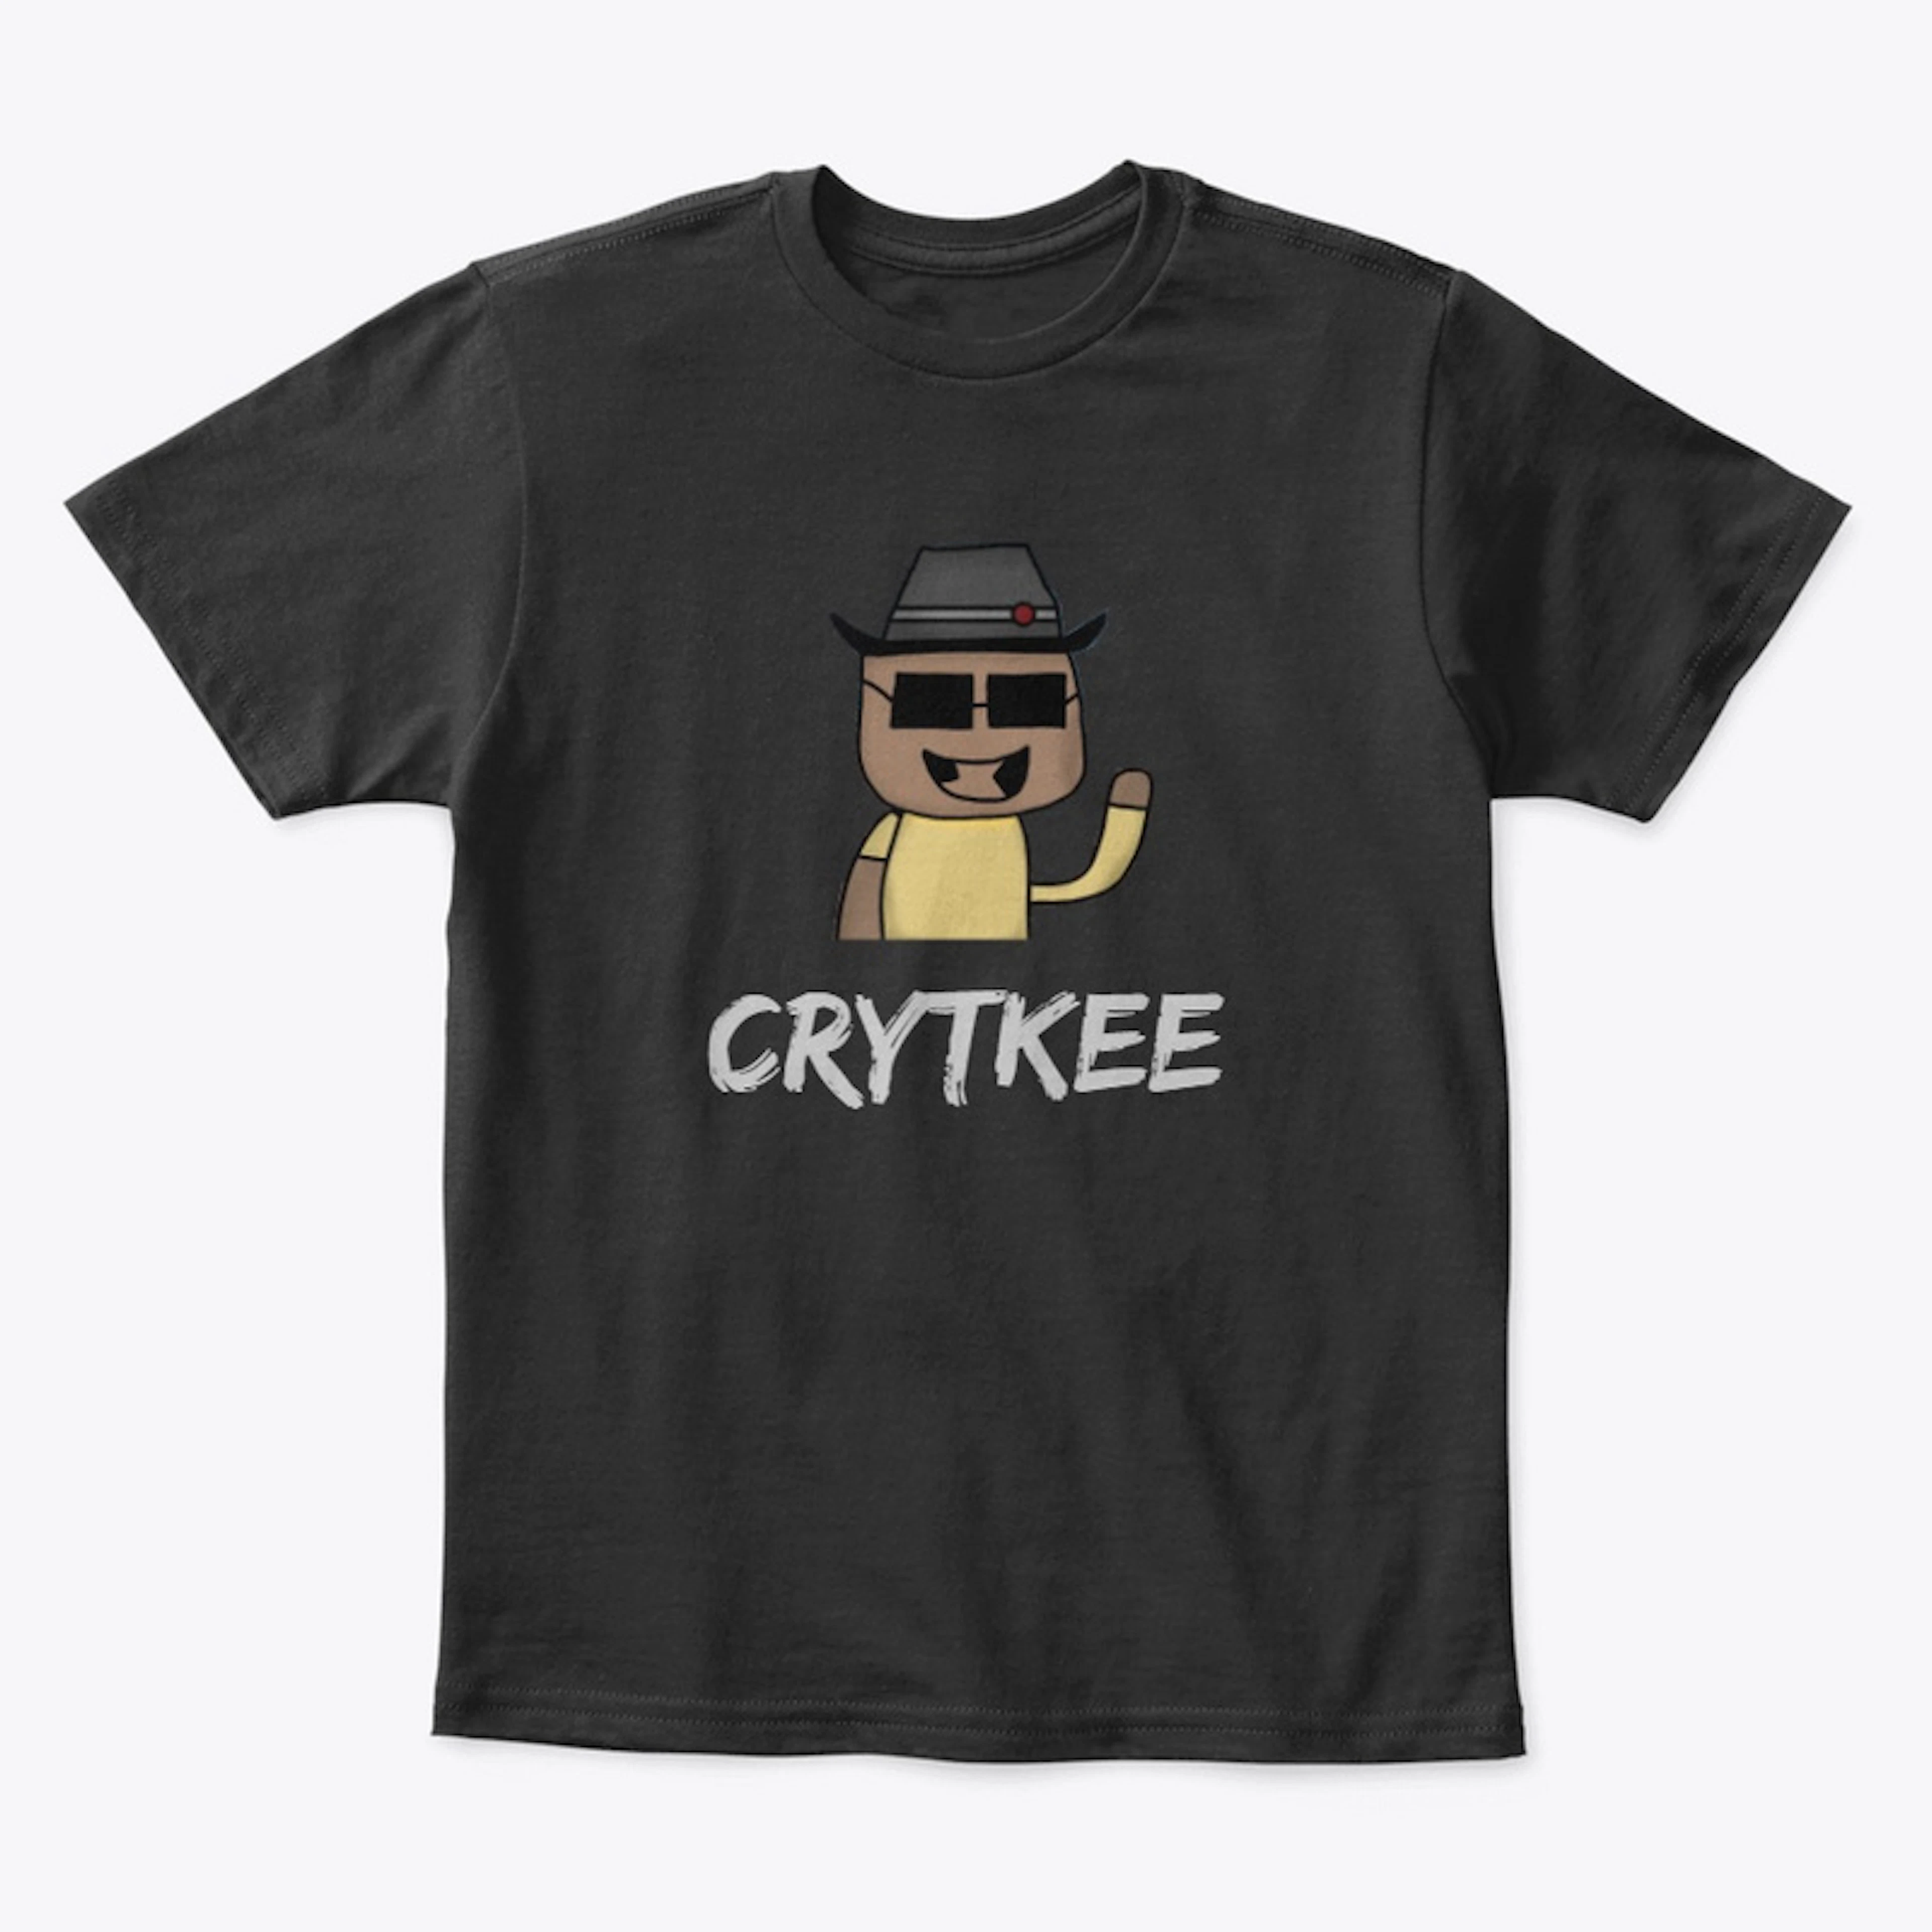 Crytkee's Epic Kid T-Shirt